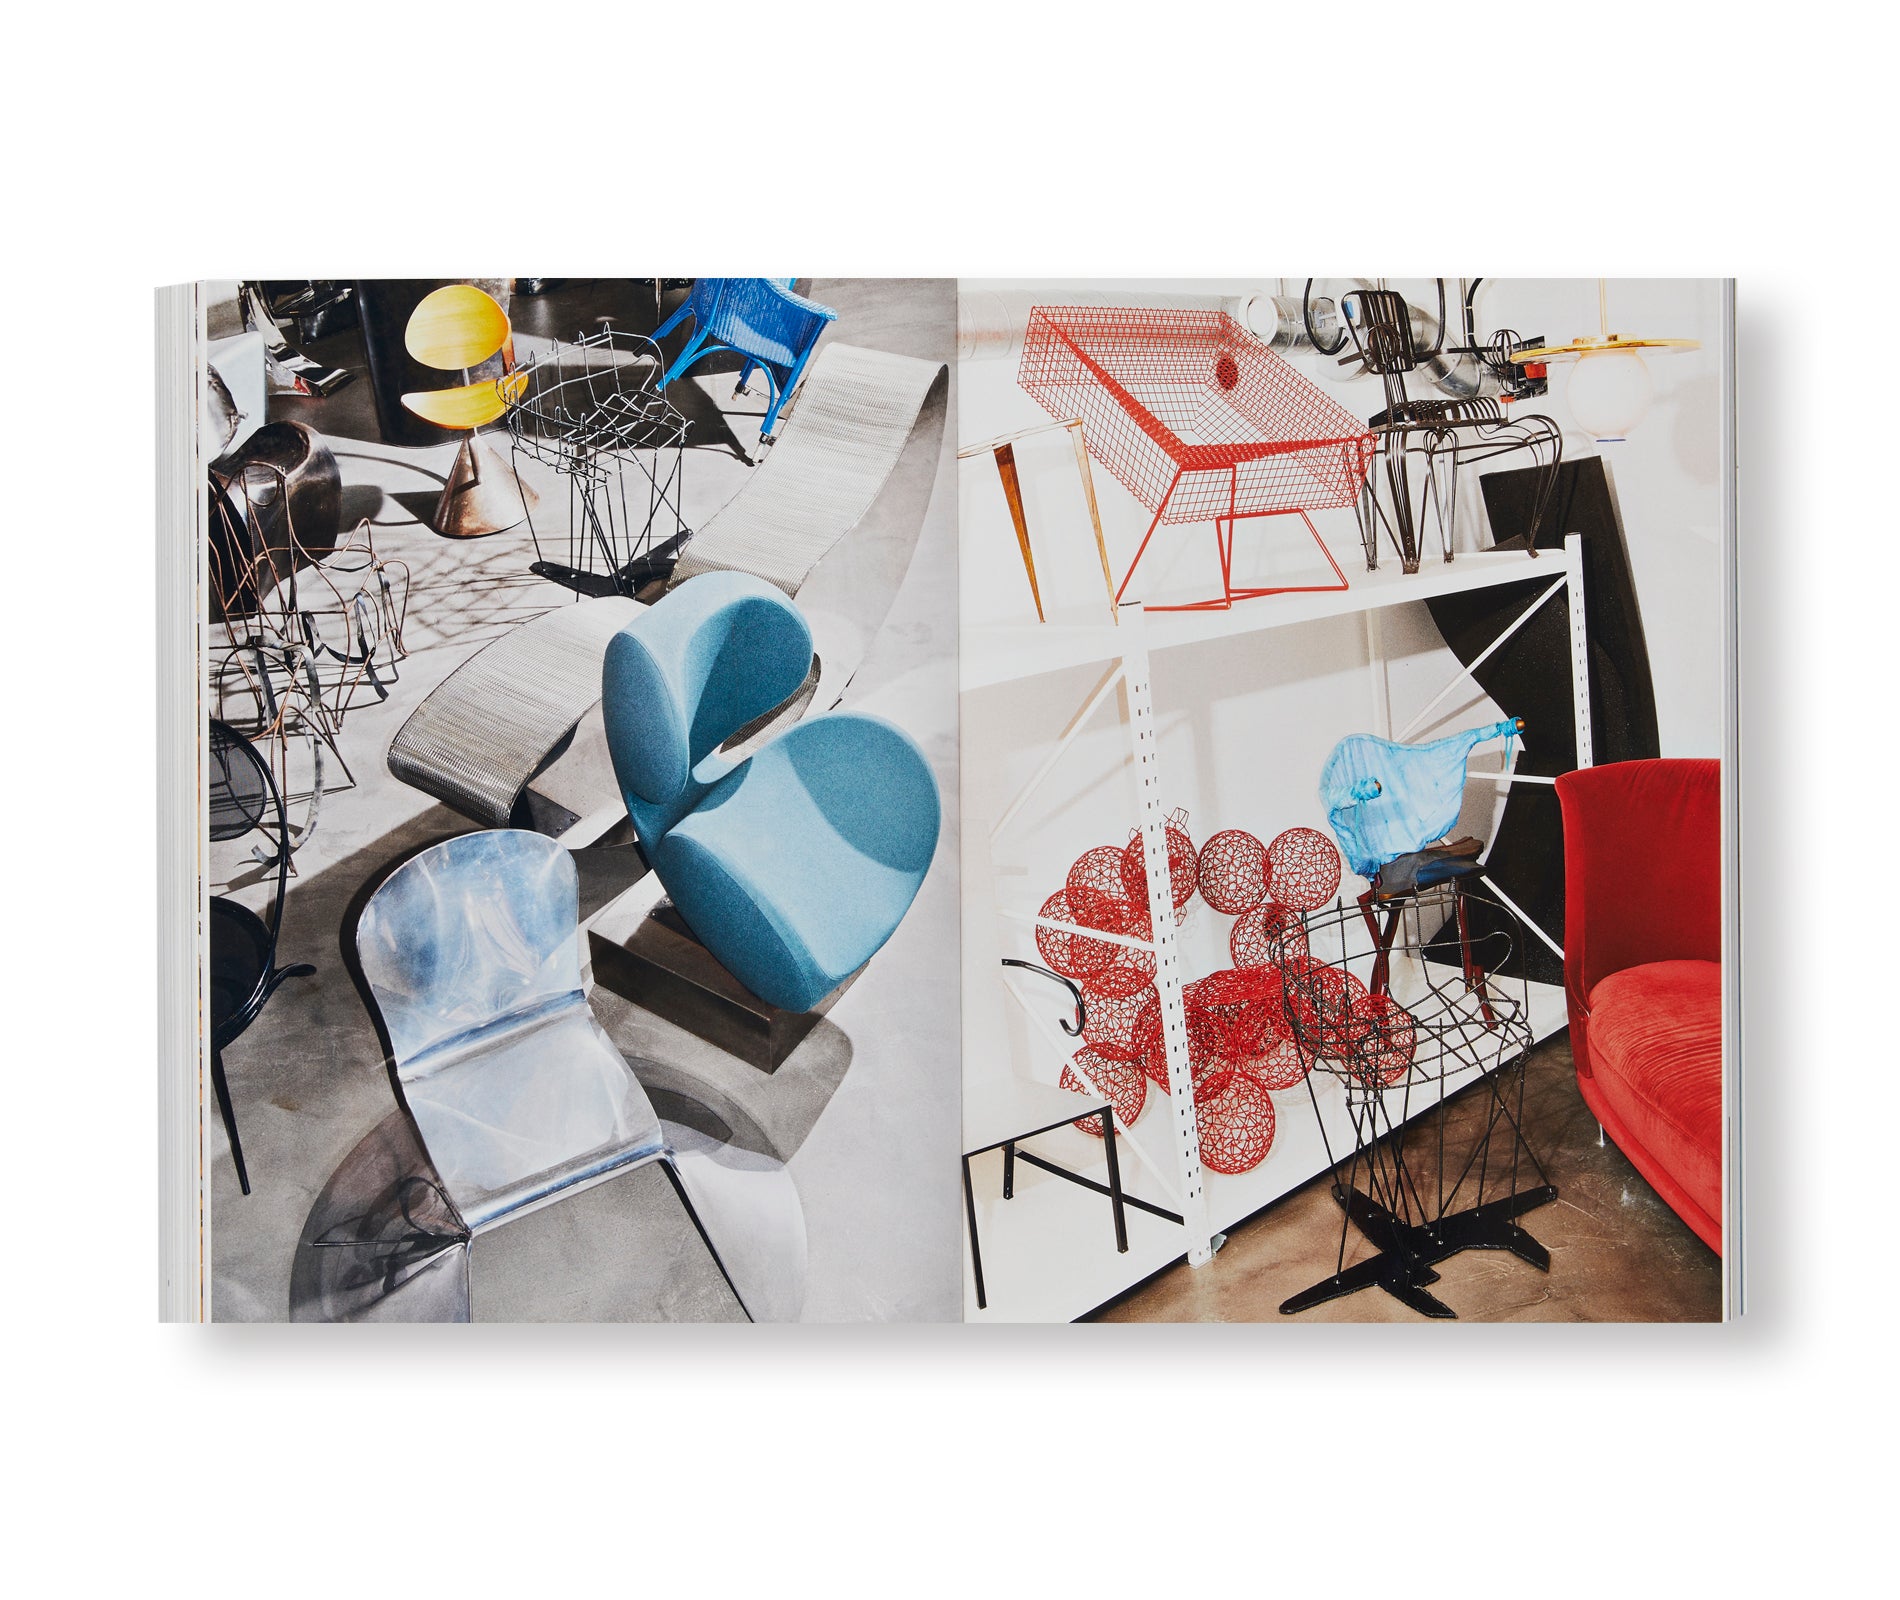 THE SPIRIT OF CHAIRS: THE CHAIR COLLECTION OF THIERRY BARBIER-MUELLER